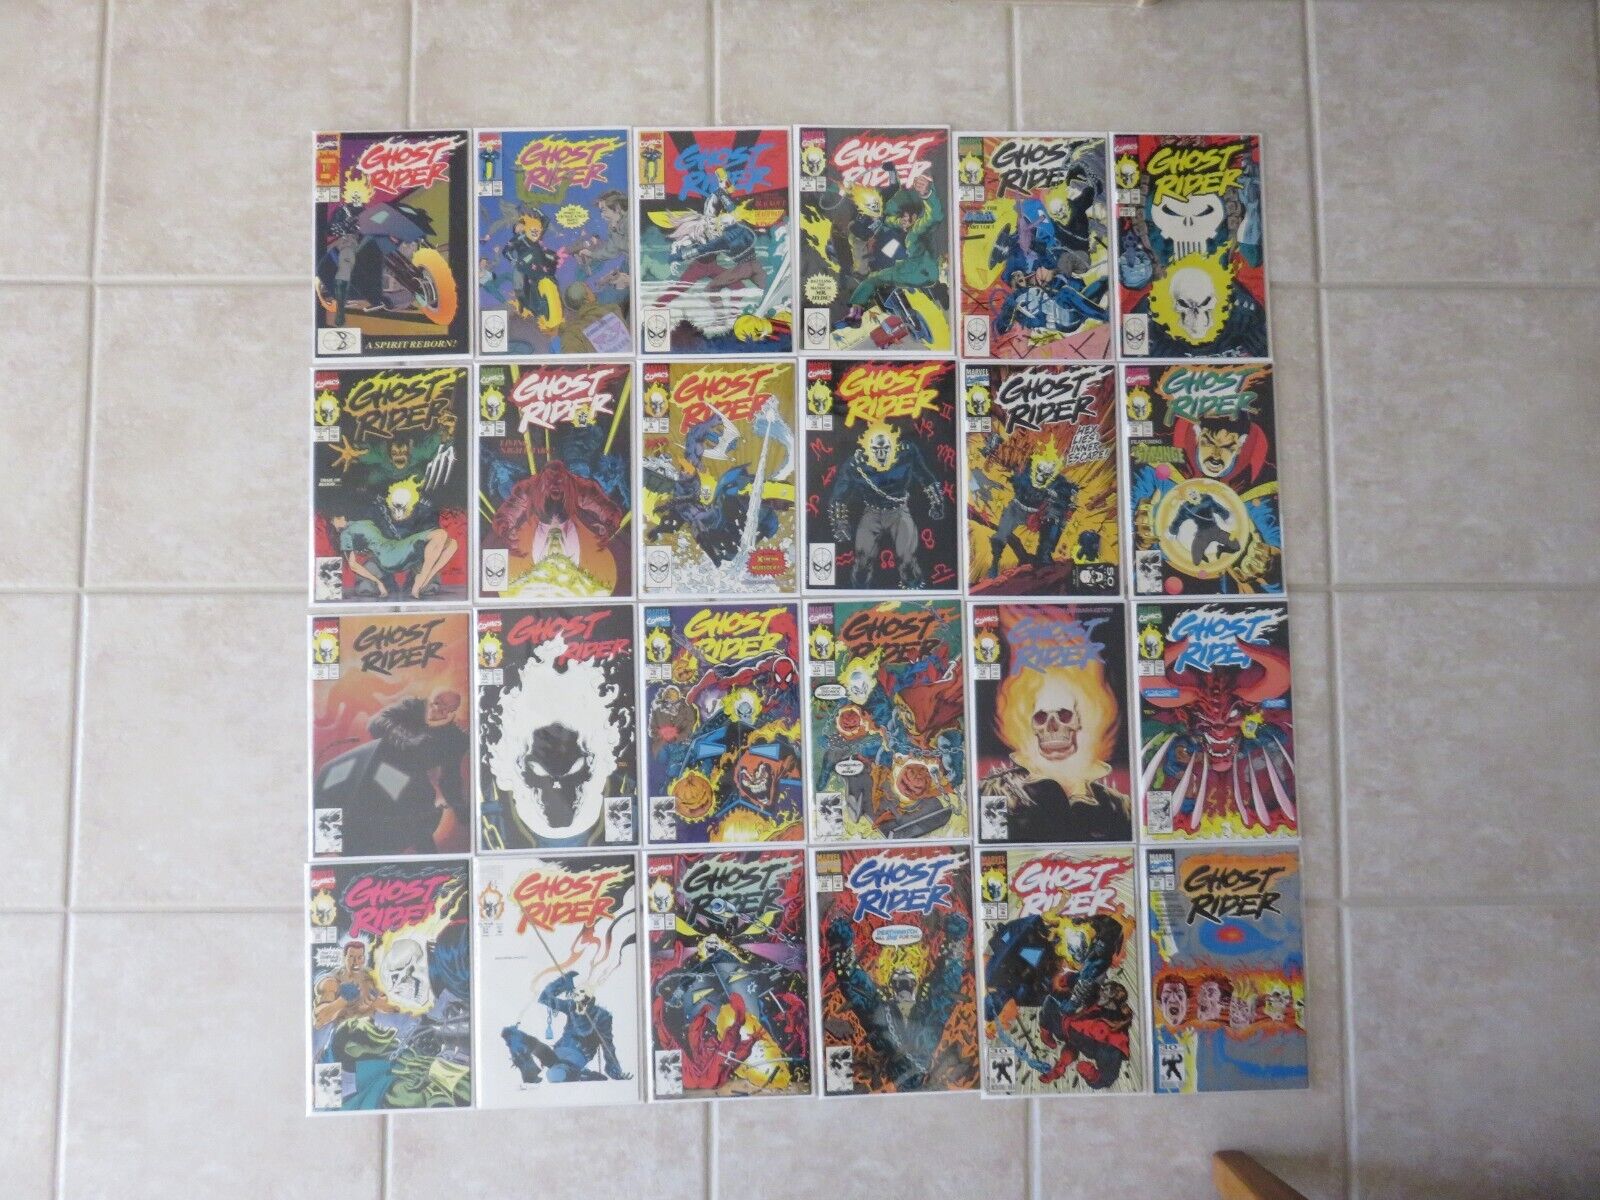 Ghost Rider  Marvel Comics 1990 #1-25 Missing #14 All NM or better